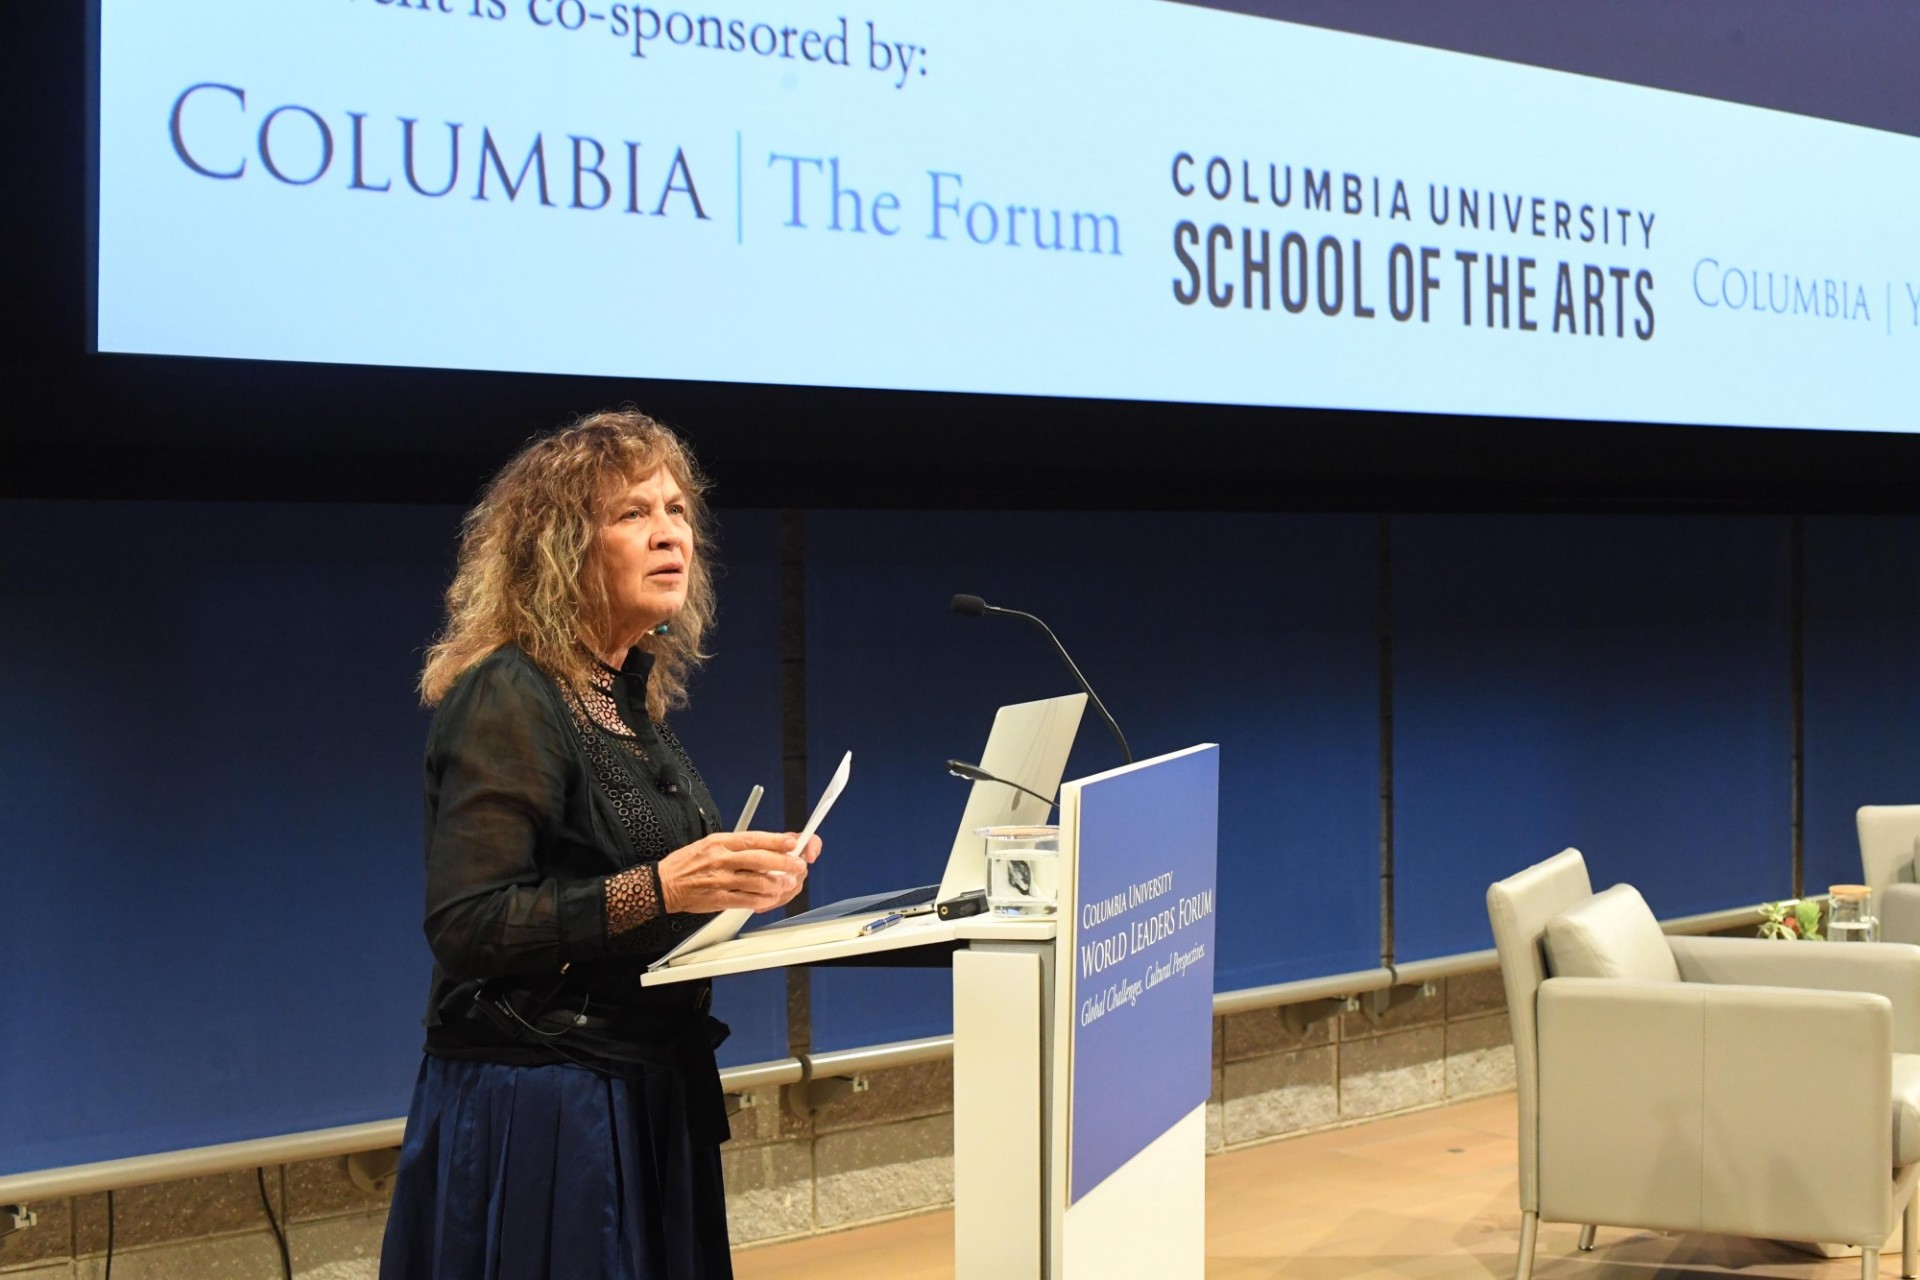 Carol Becker, Dean of Columbia University School of the Arts begins the World Leaders Forum with an introduction of Olafur Eliasson, Multimedia Artist.